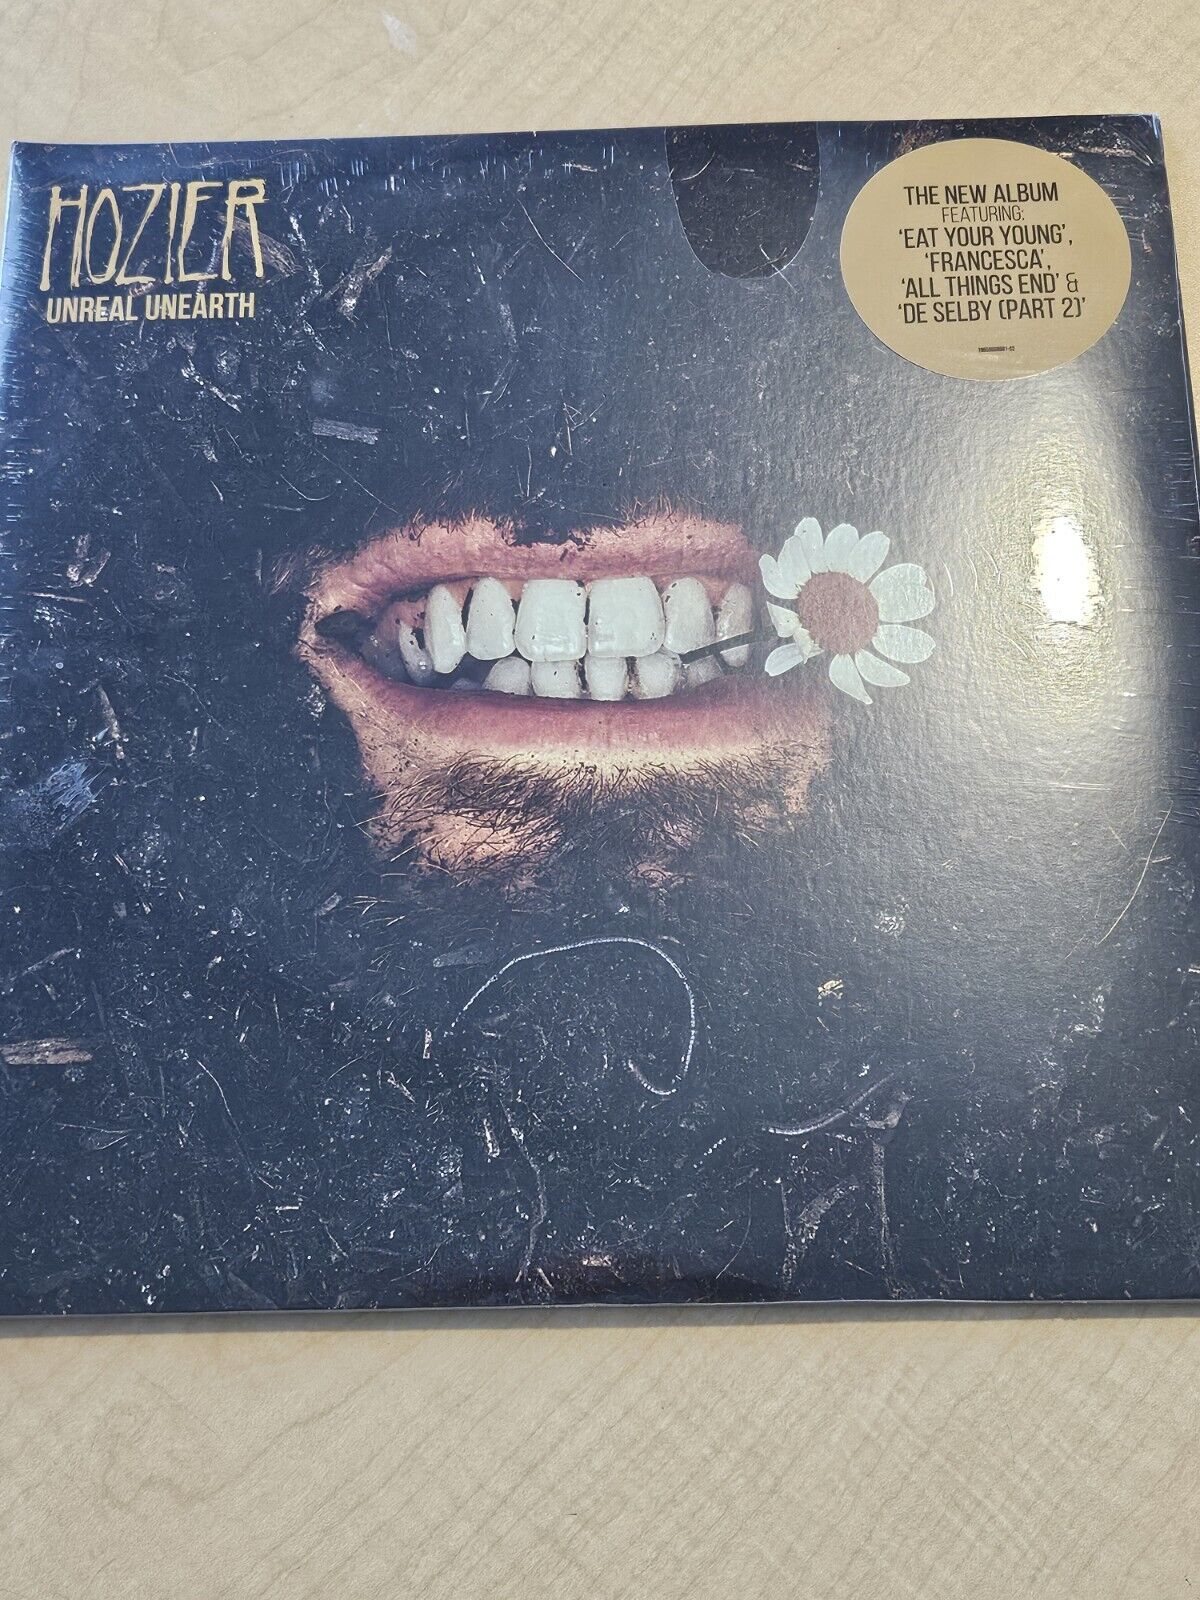 Hozier - Unreal Unearth - Unopened, Never Used